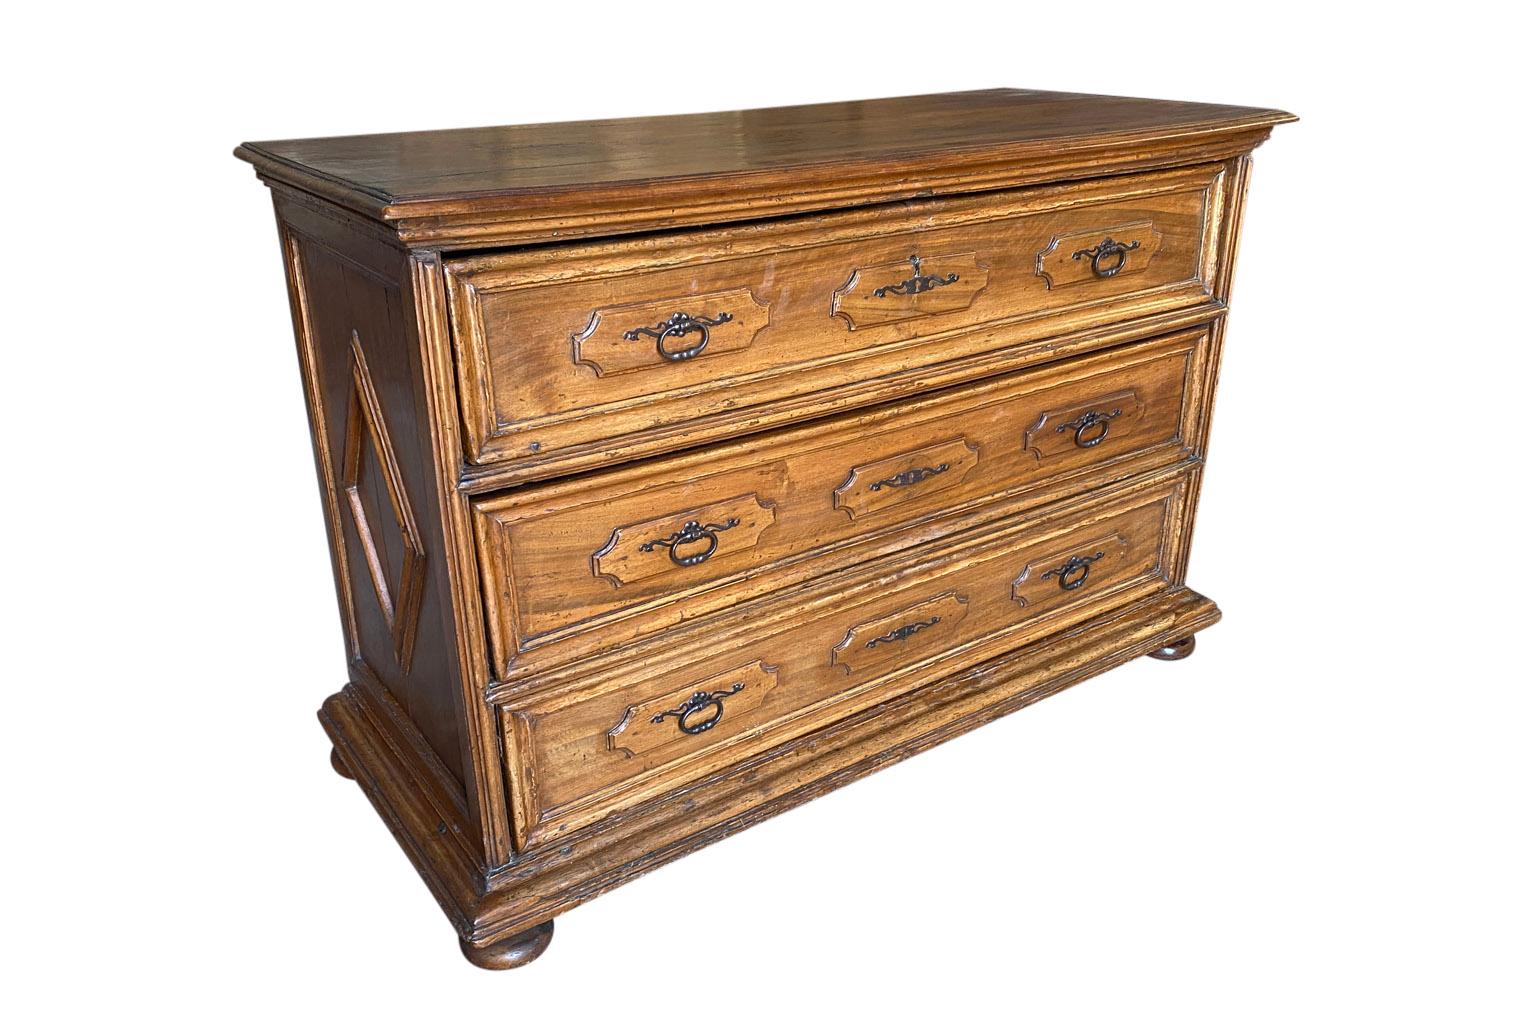 A very beautiful 18th century commode from the Lombardi region of Italy. Soundly constructed from stunning walnut with diamond shape molded side panels raised on bun feet. Excellent patina and graining.